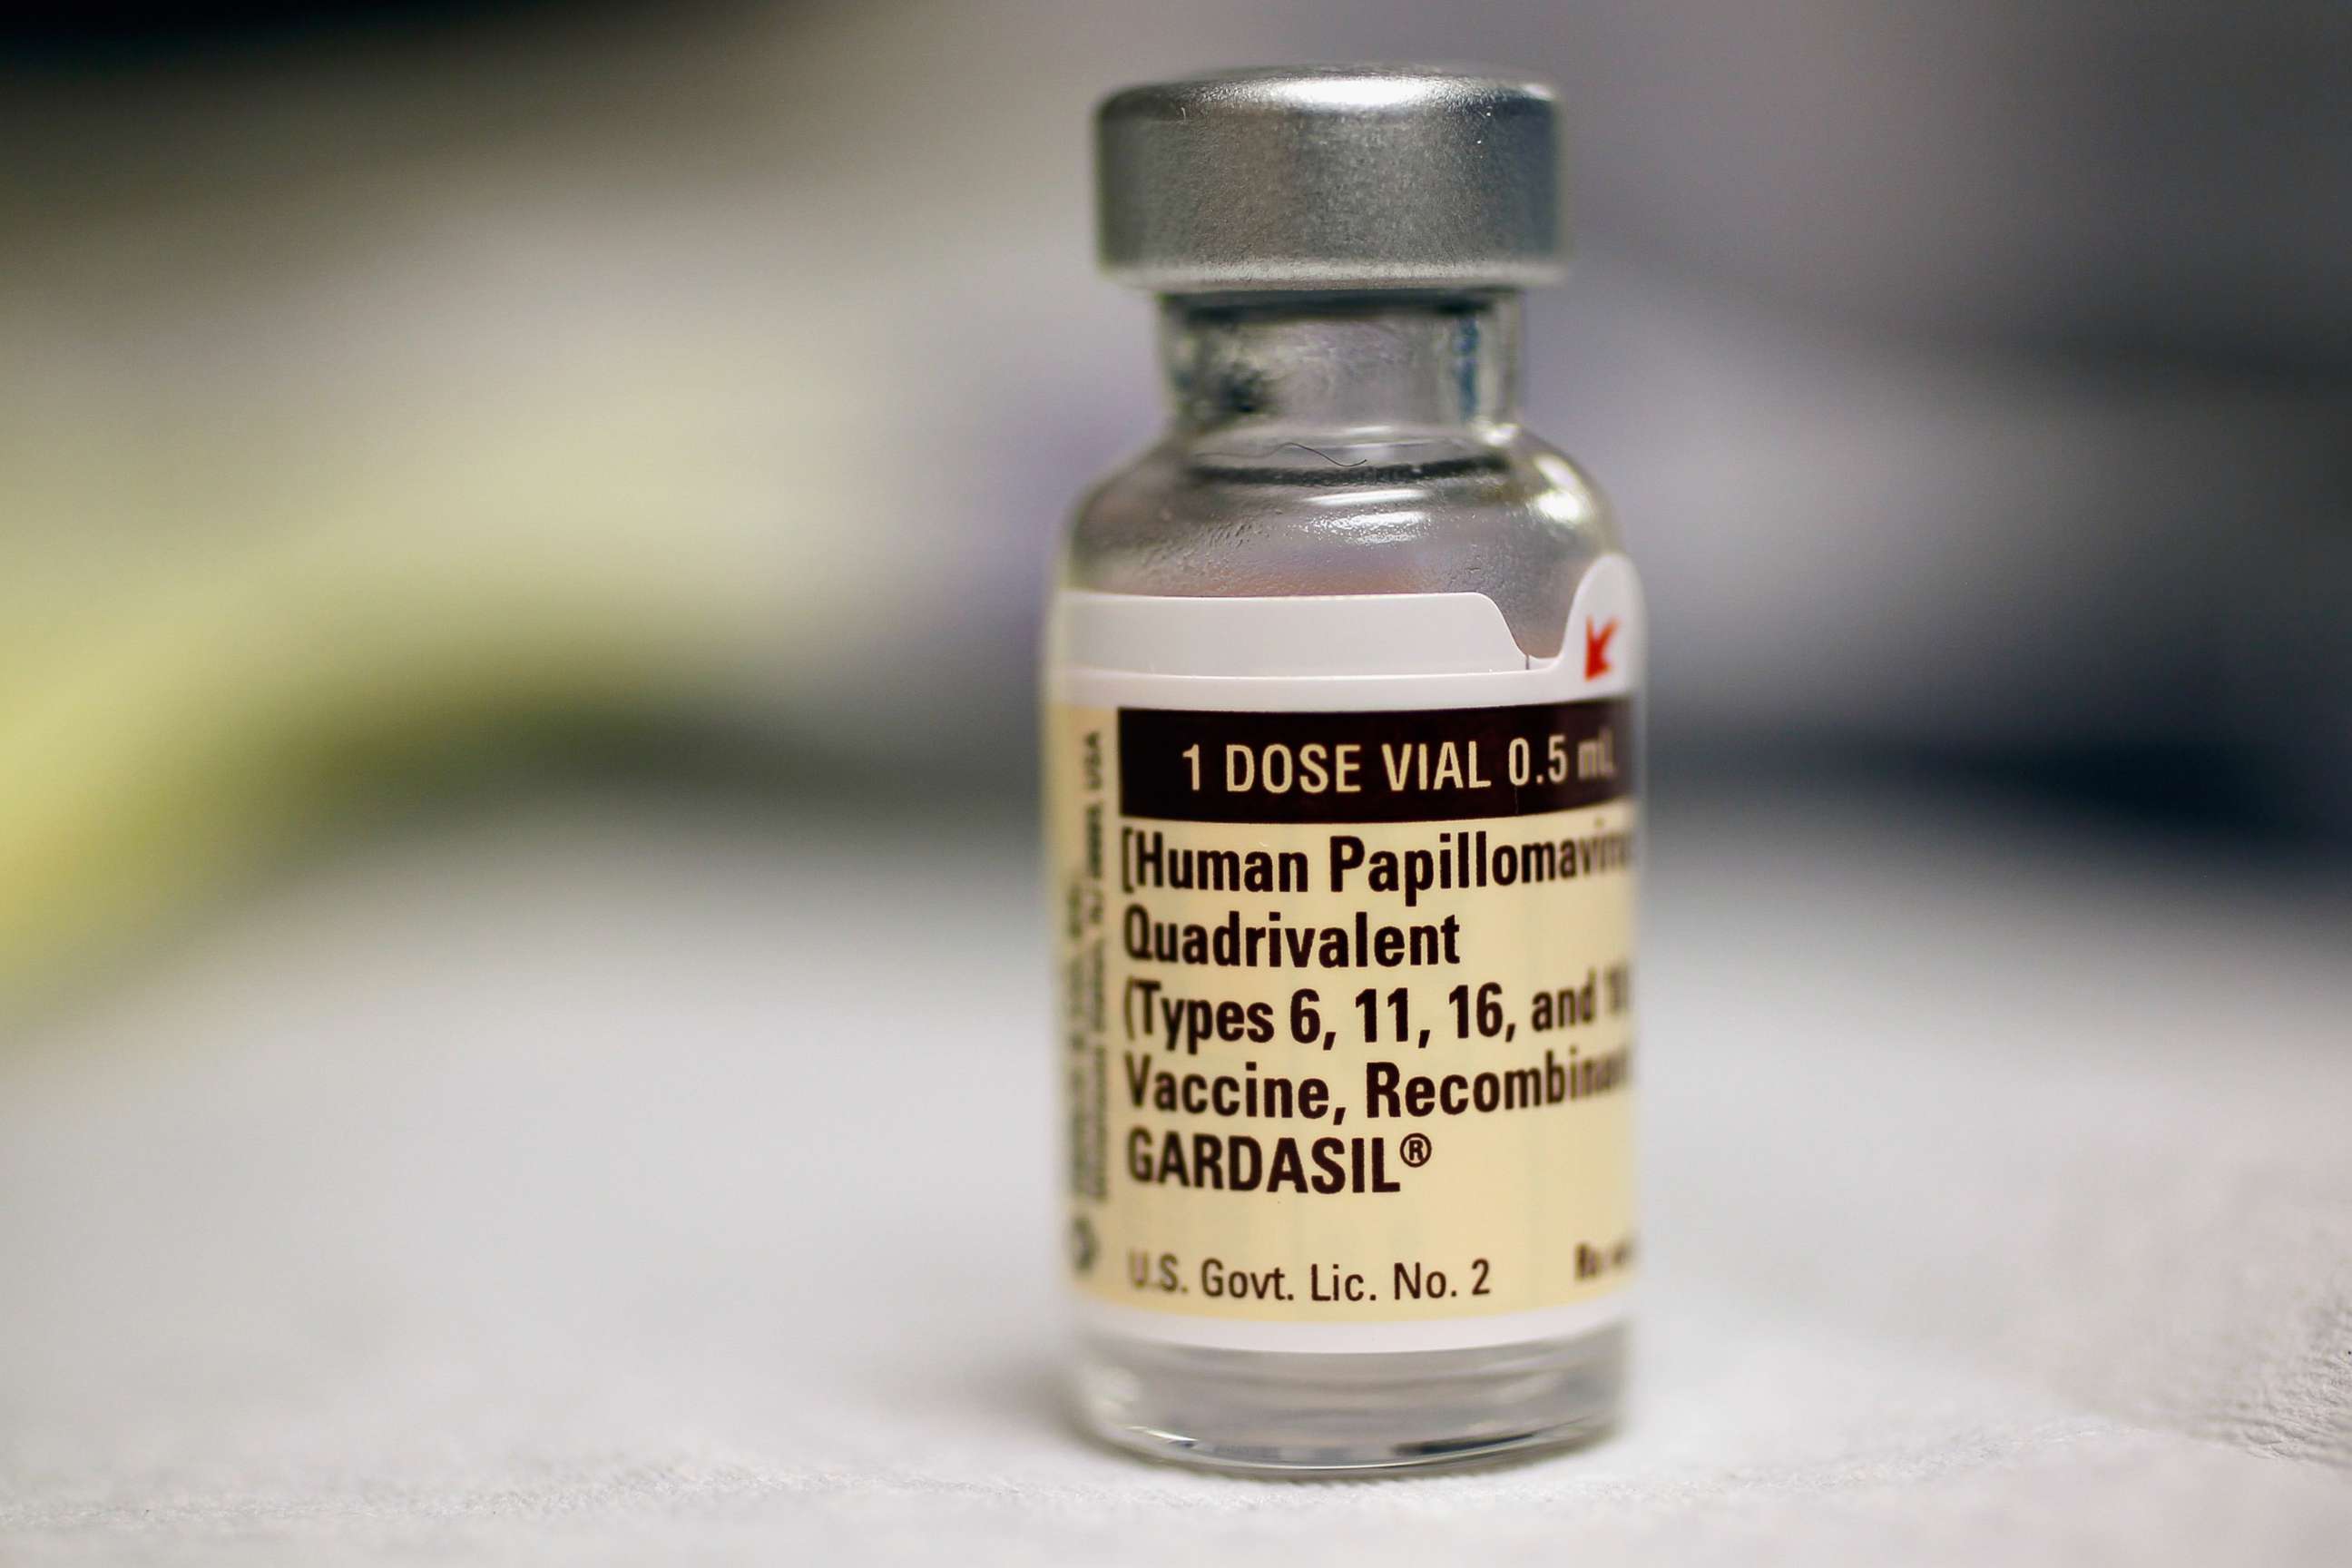 PHOTO: A vial of the Human Papillomavirus vaccine is seen at the University of Miami Miller School of Medicine on Sept. 21, 2011, in Miami.